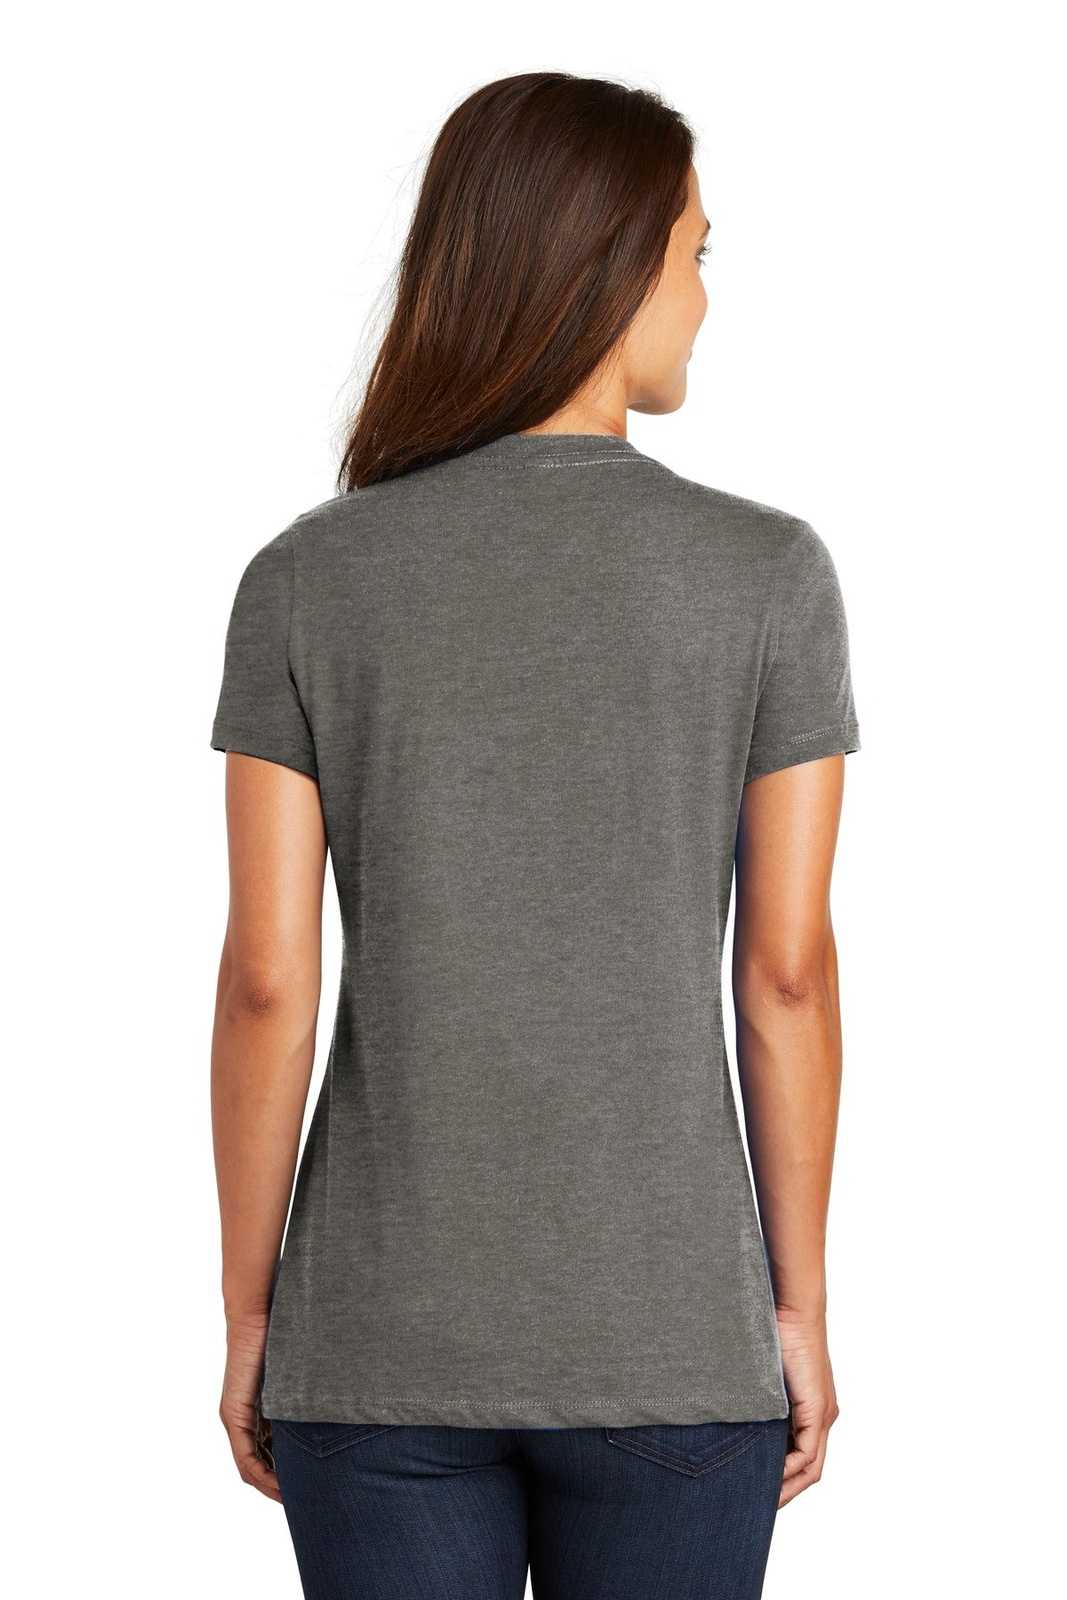 District DM1170L Women's Perfect Weight V-Neck Tee - Heathered Charcoal - HIT a Double - 1